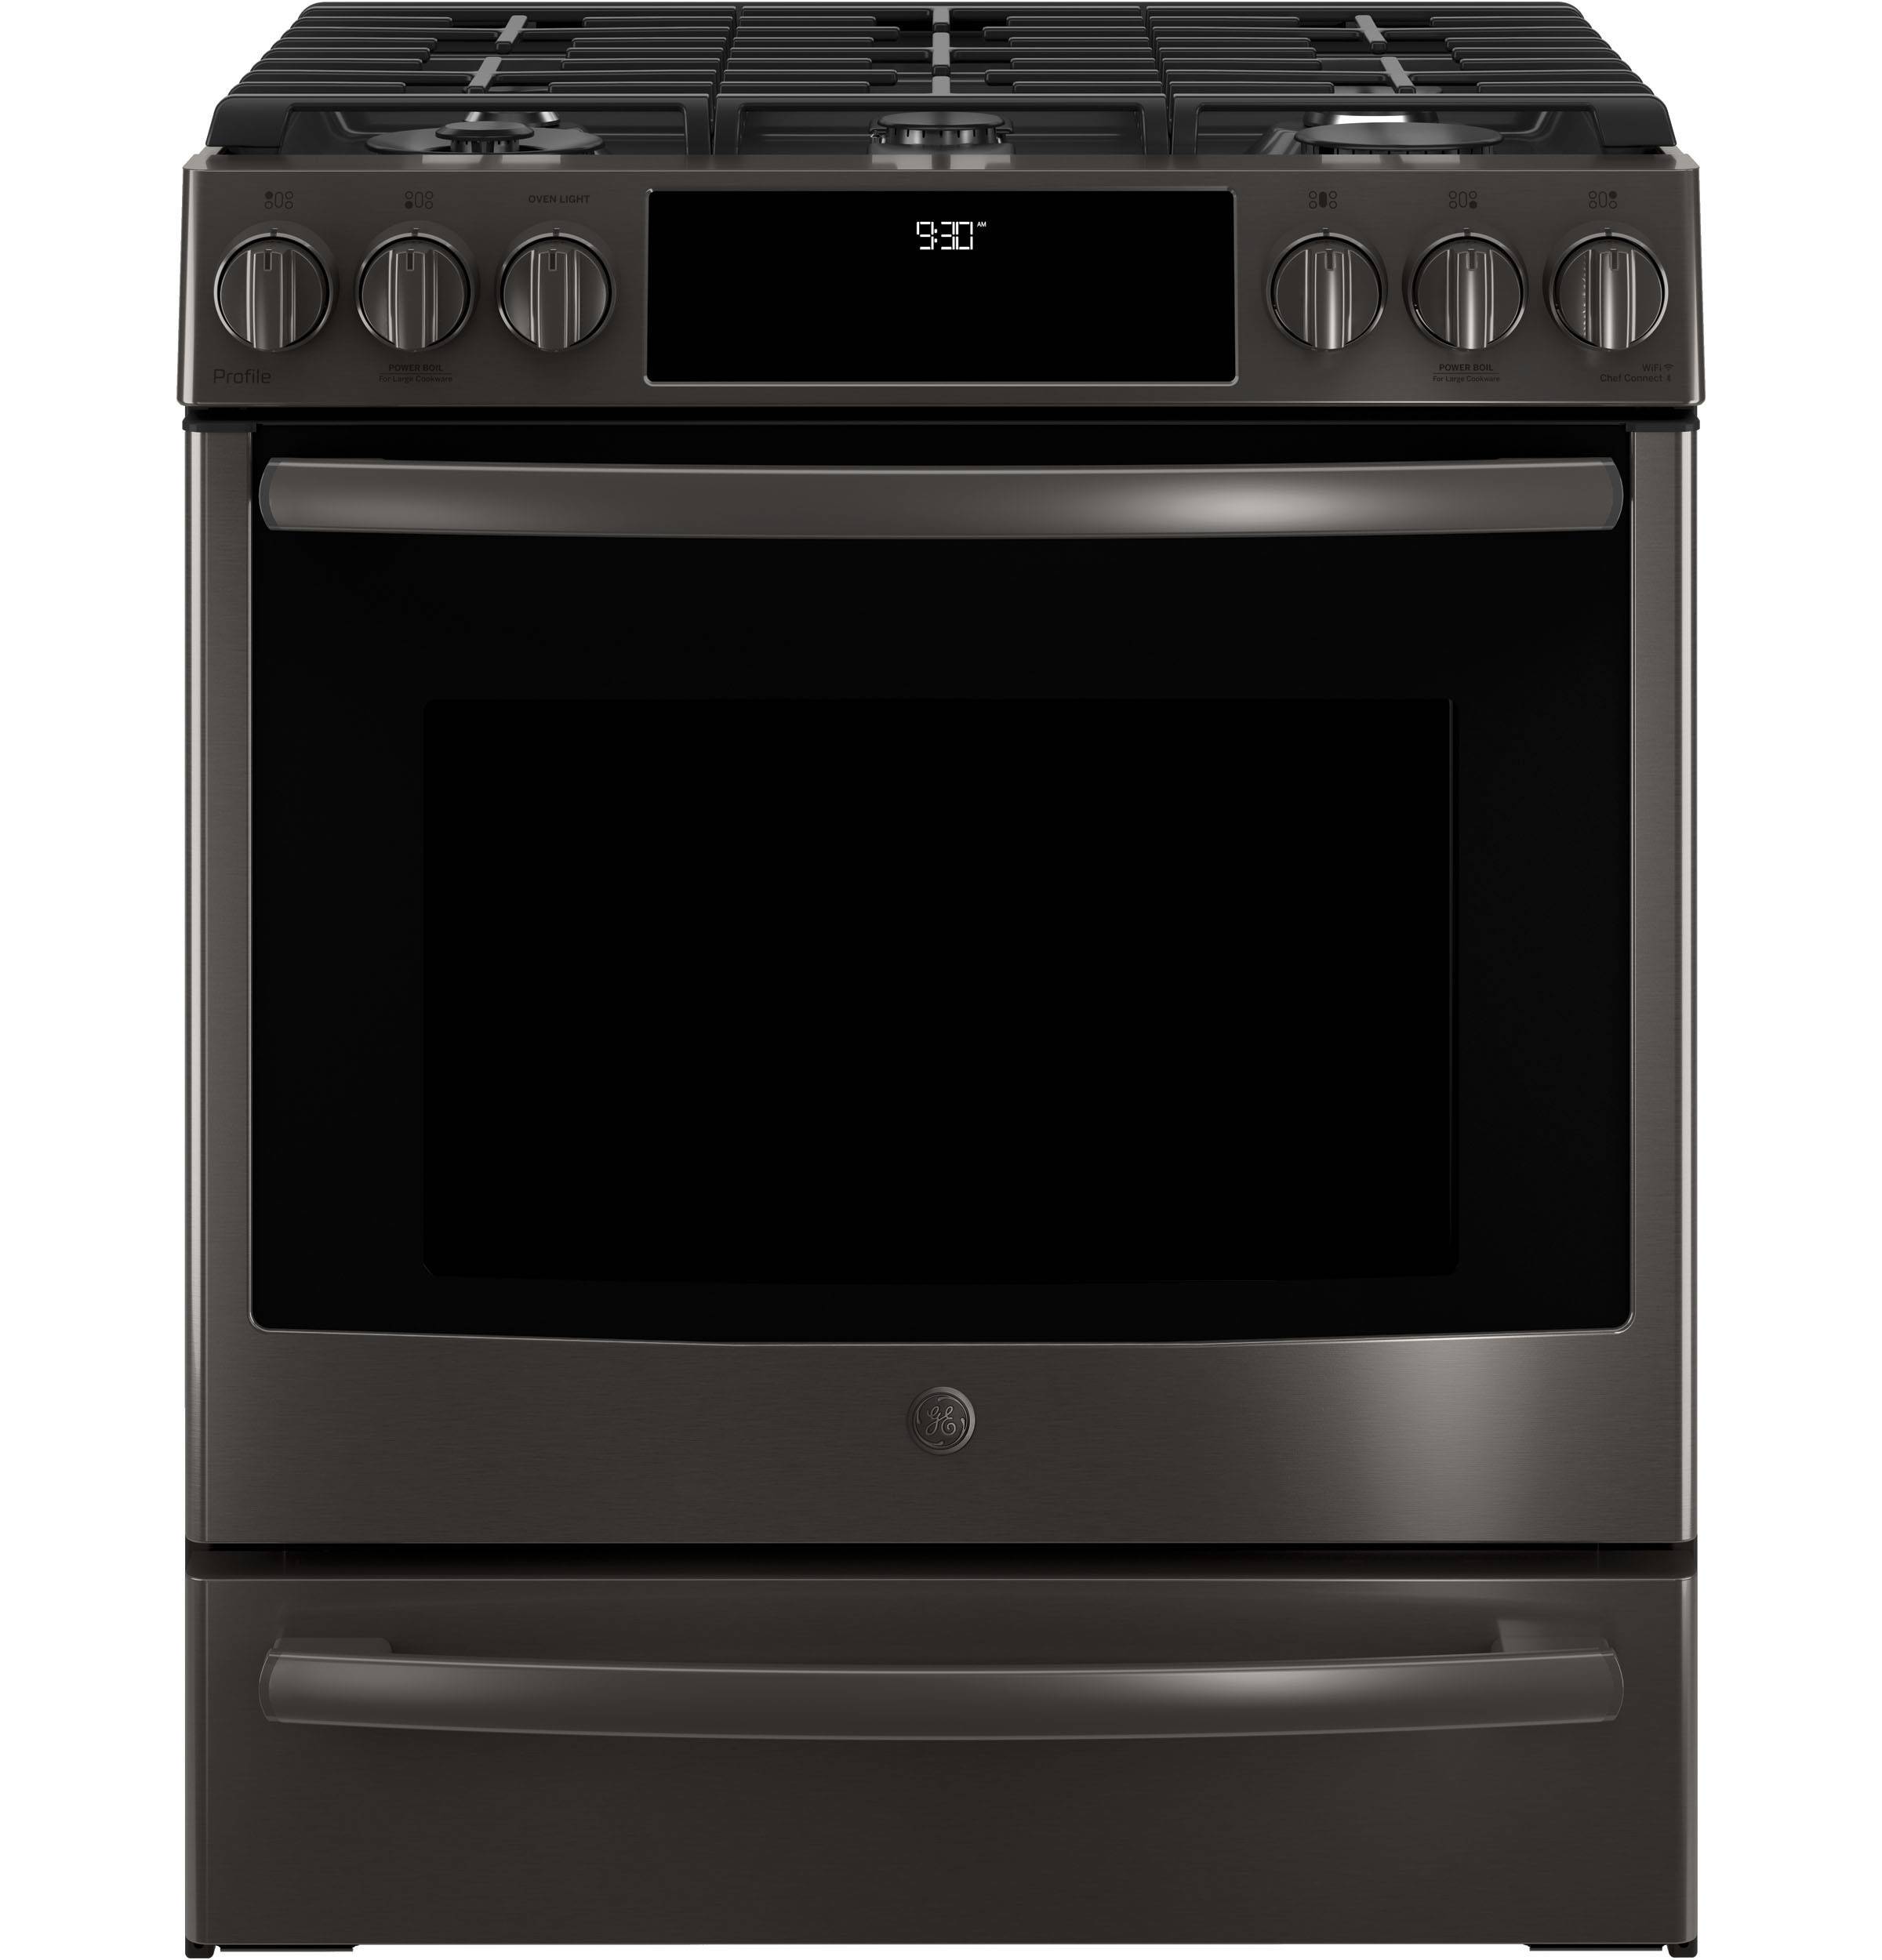 GE Profile™ Series 30" Slide-In Front Control Gas Range (Black Stainless)